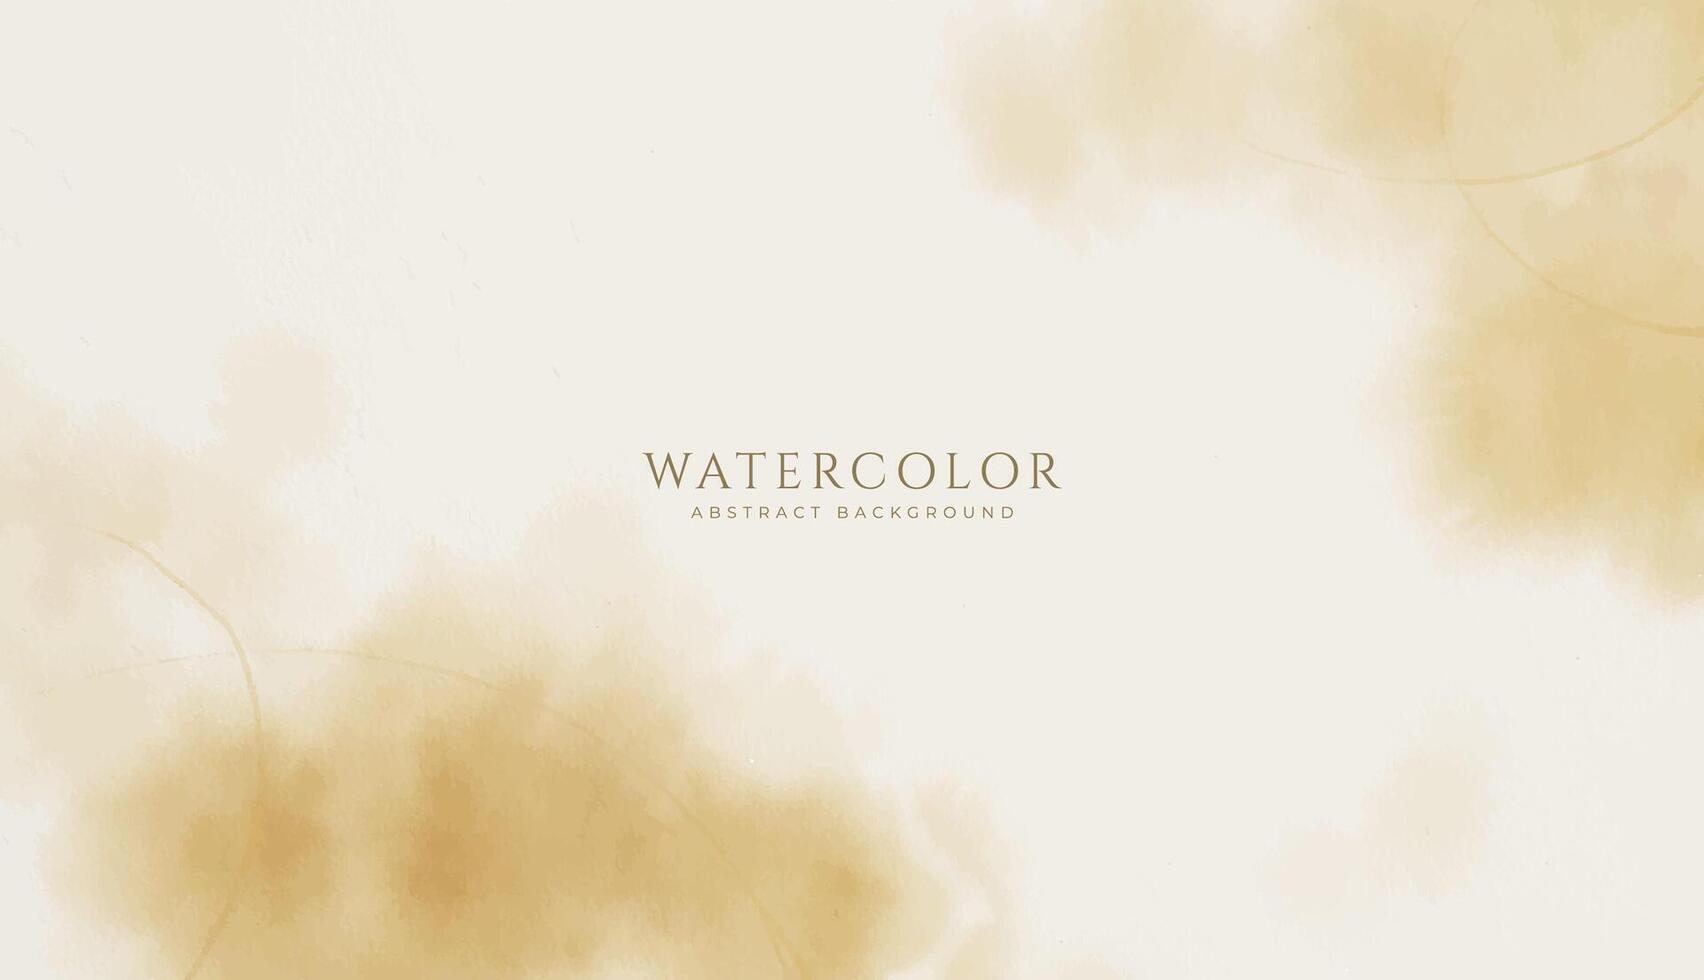 Abstract horizontal watercolor background. Neutral light beige colored empty space background illustration vector